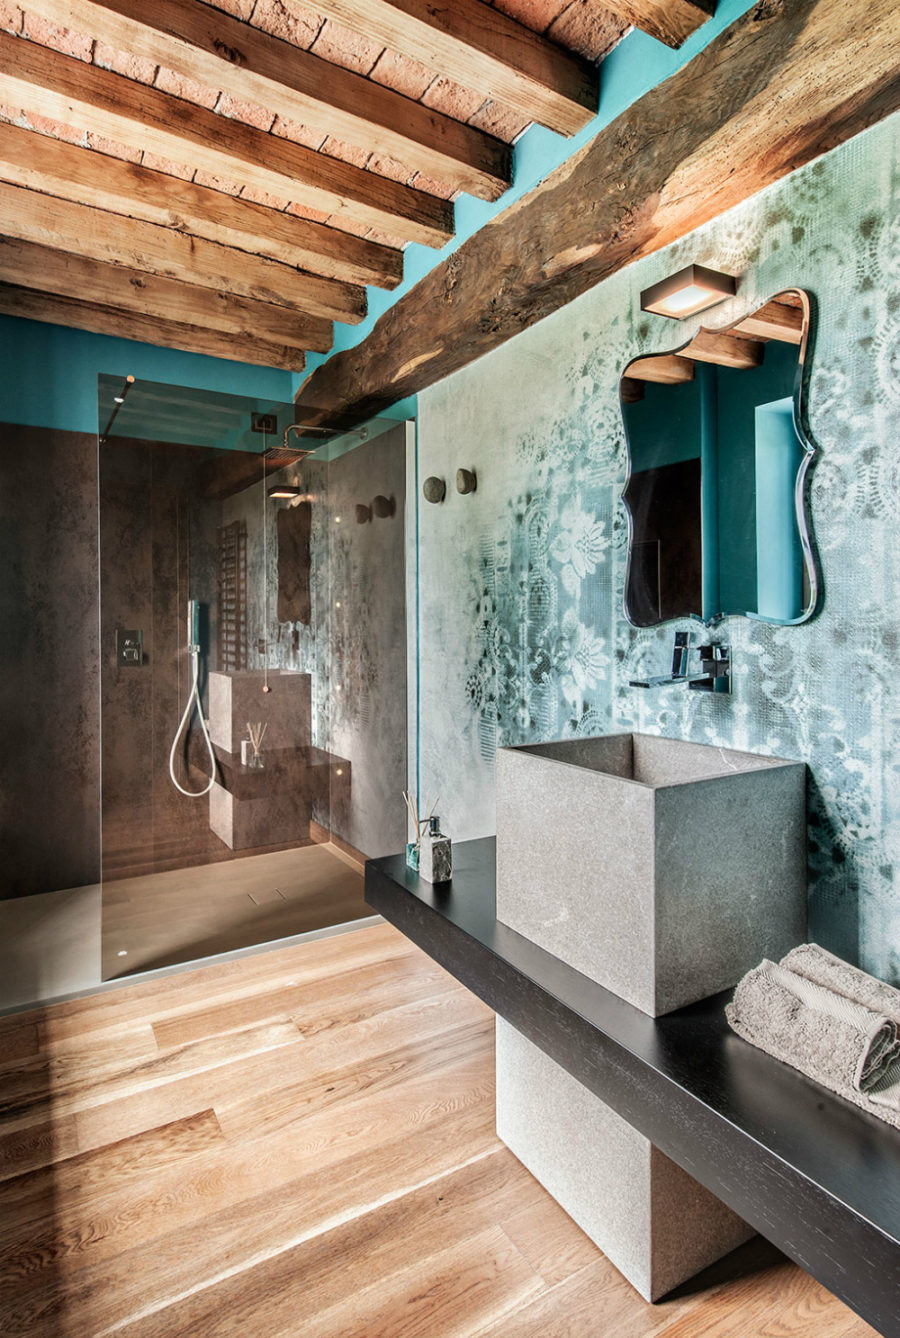 Fading lace patterns contrast with the worn wooden beams in the second bathroom